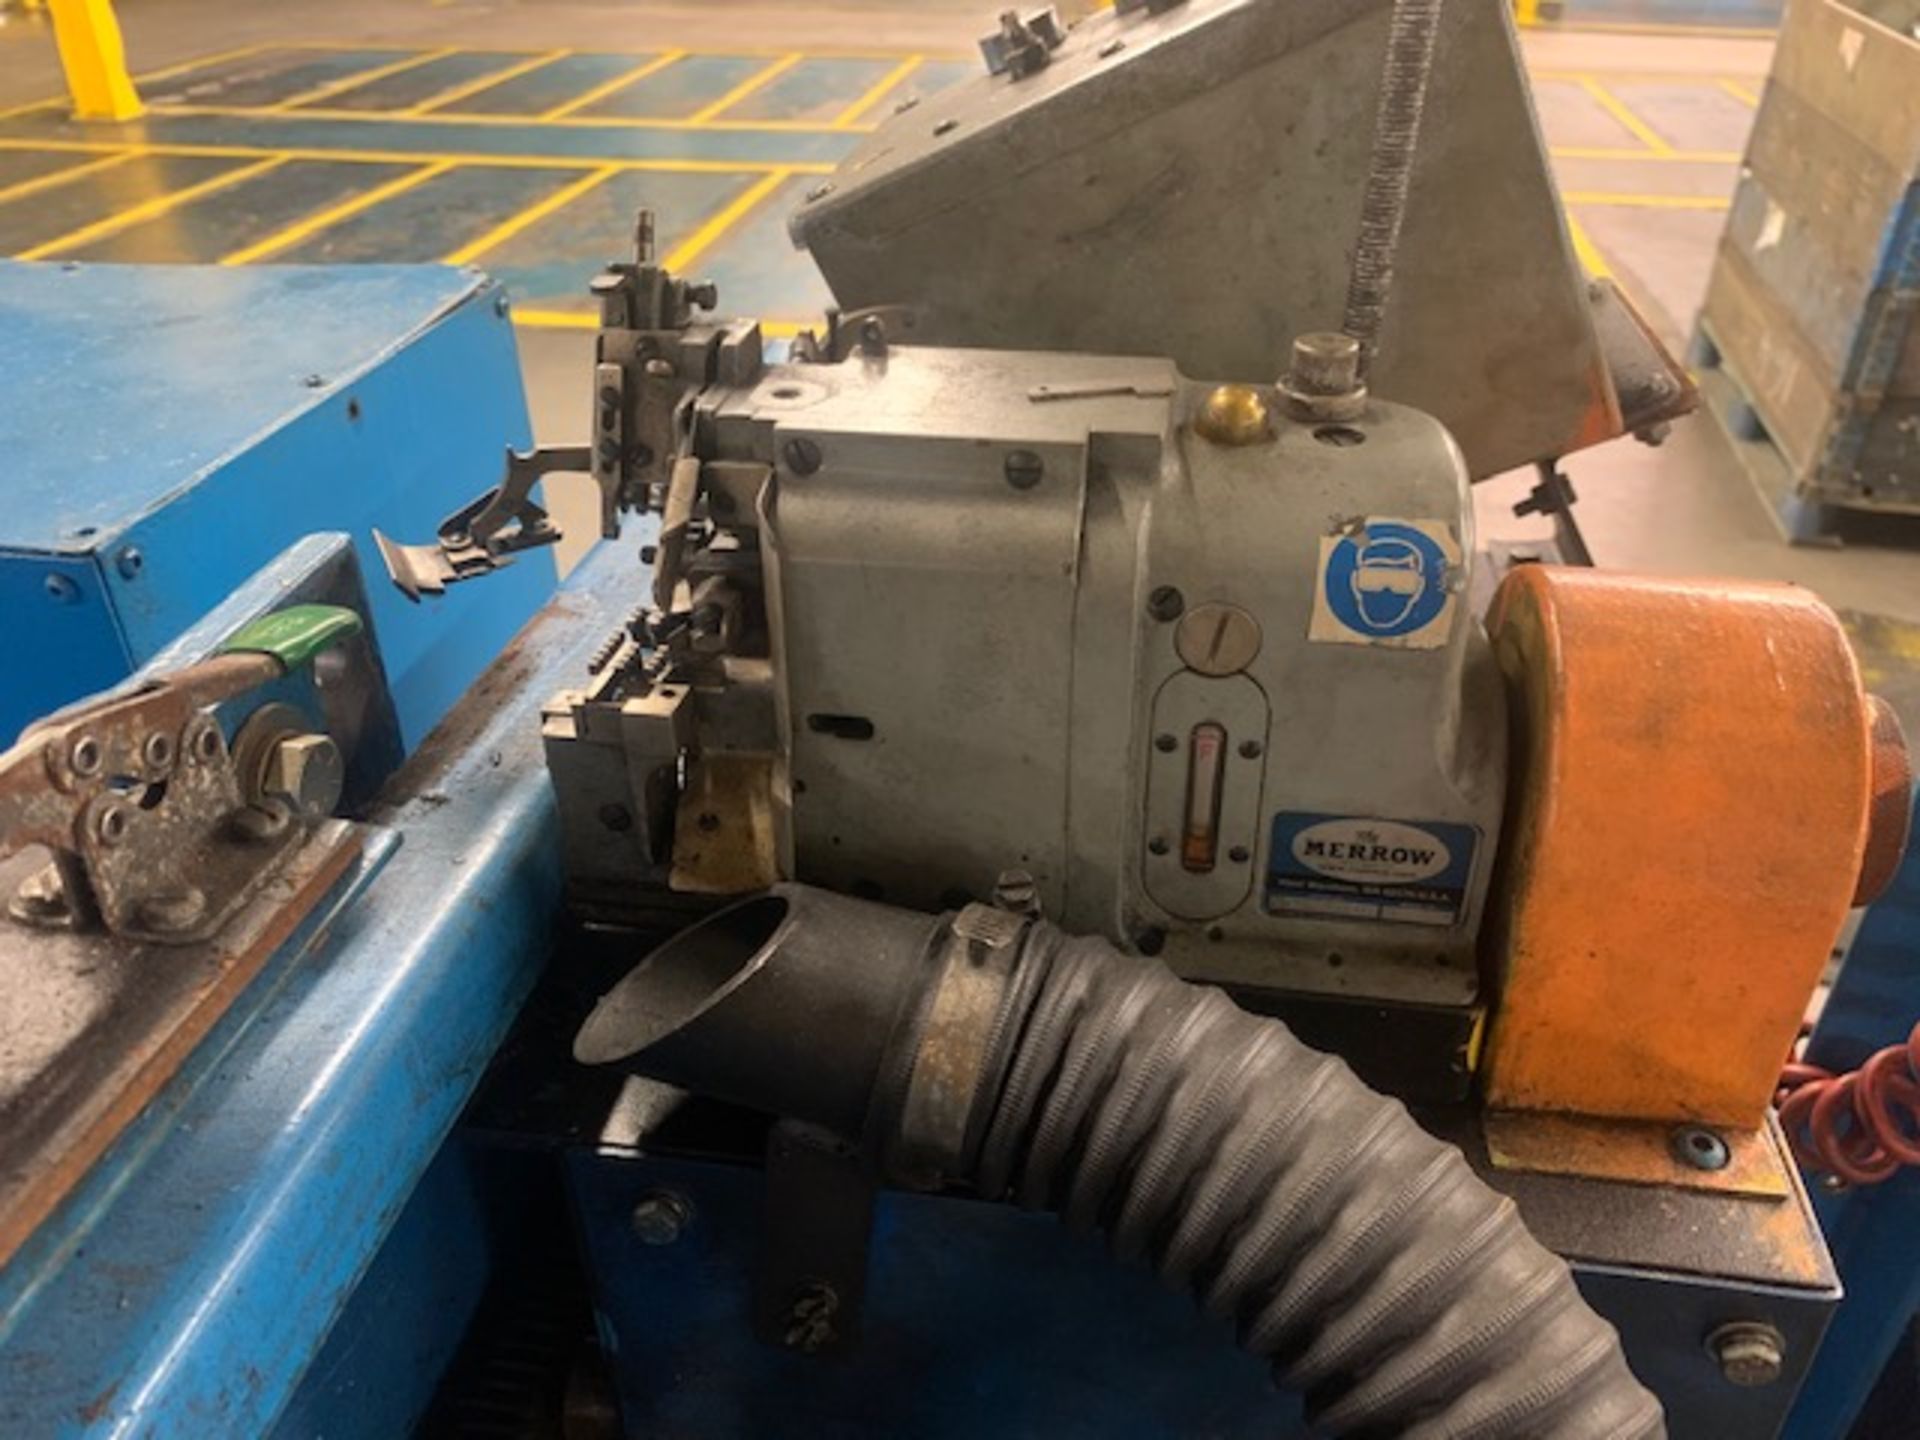 Dayco Rewind Table w/ Controls & Merrow 70-D3B2 Industrial Butt Seamer, 61-1/2" Long Rollers - Image 8 of 9